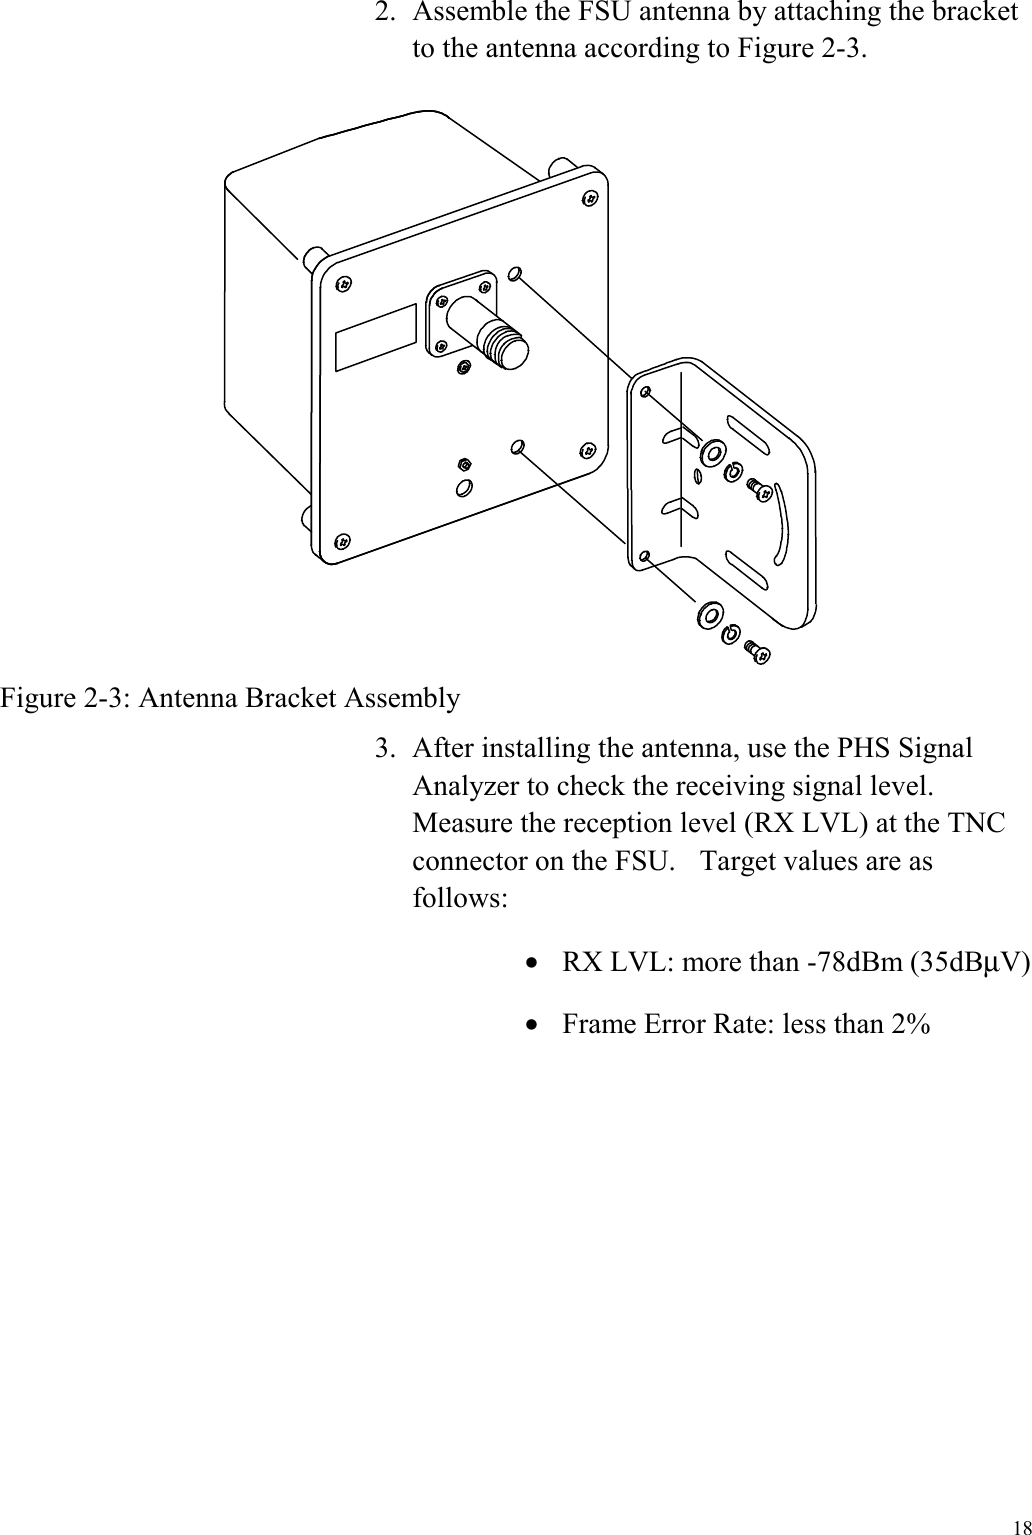  18 2.  Assemble the FSU antenna by attaching the bracket to the antenna according to Figure 2-3.  Figure 2-3: Antenna Bracket Assembly 3.  After installing the antenna, use the PHS Signal Analyzer to check the receiving signal level.   Measure the reception level (RX LVL) at the TNC connector on the FSU.    Target values are as follows: •  RX LVL: more than -78dBm (35dBµV) •  Frame Error Rate: less than 2% 